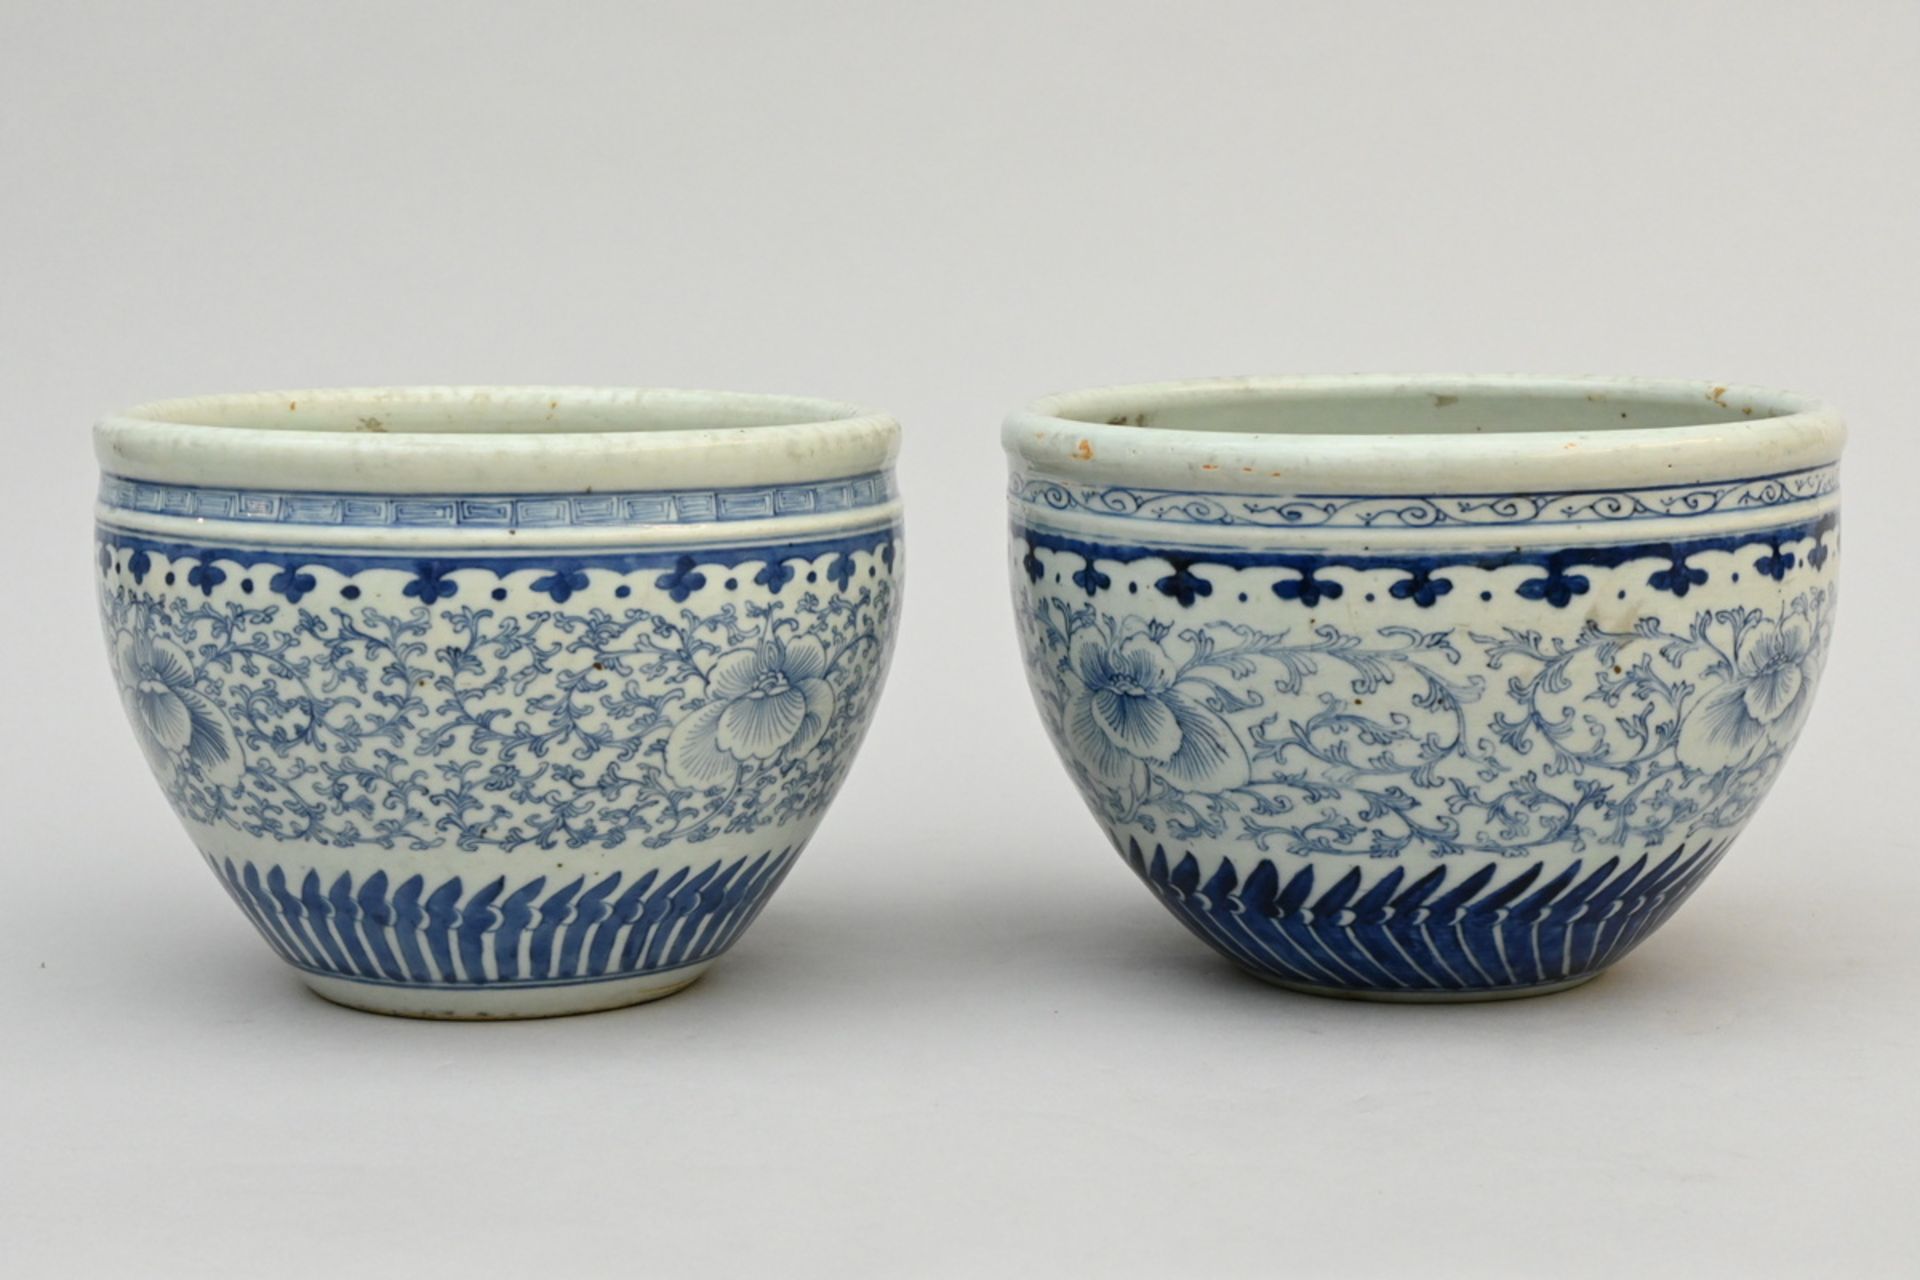 Two Chinese planters in blue and white porcelain, 19th century (dia 26-27.5cm) - Image 2 of 4